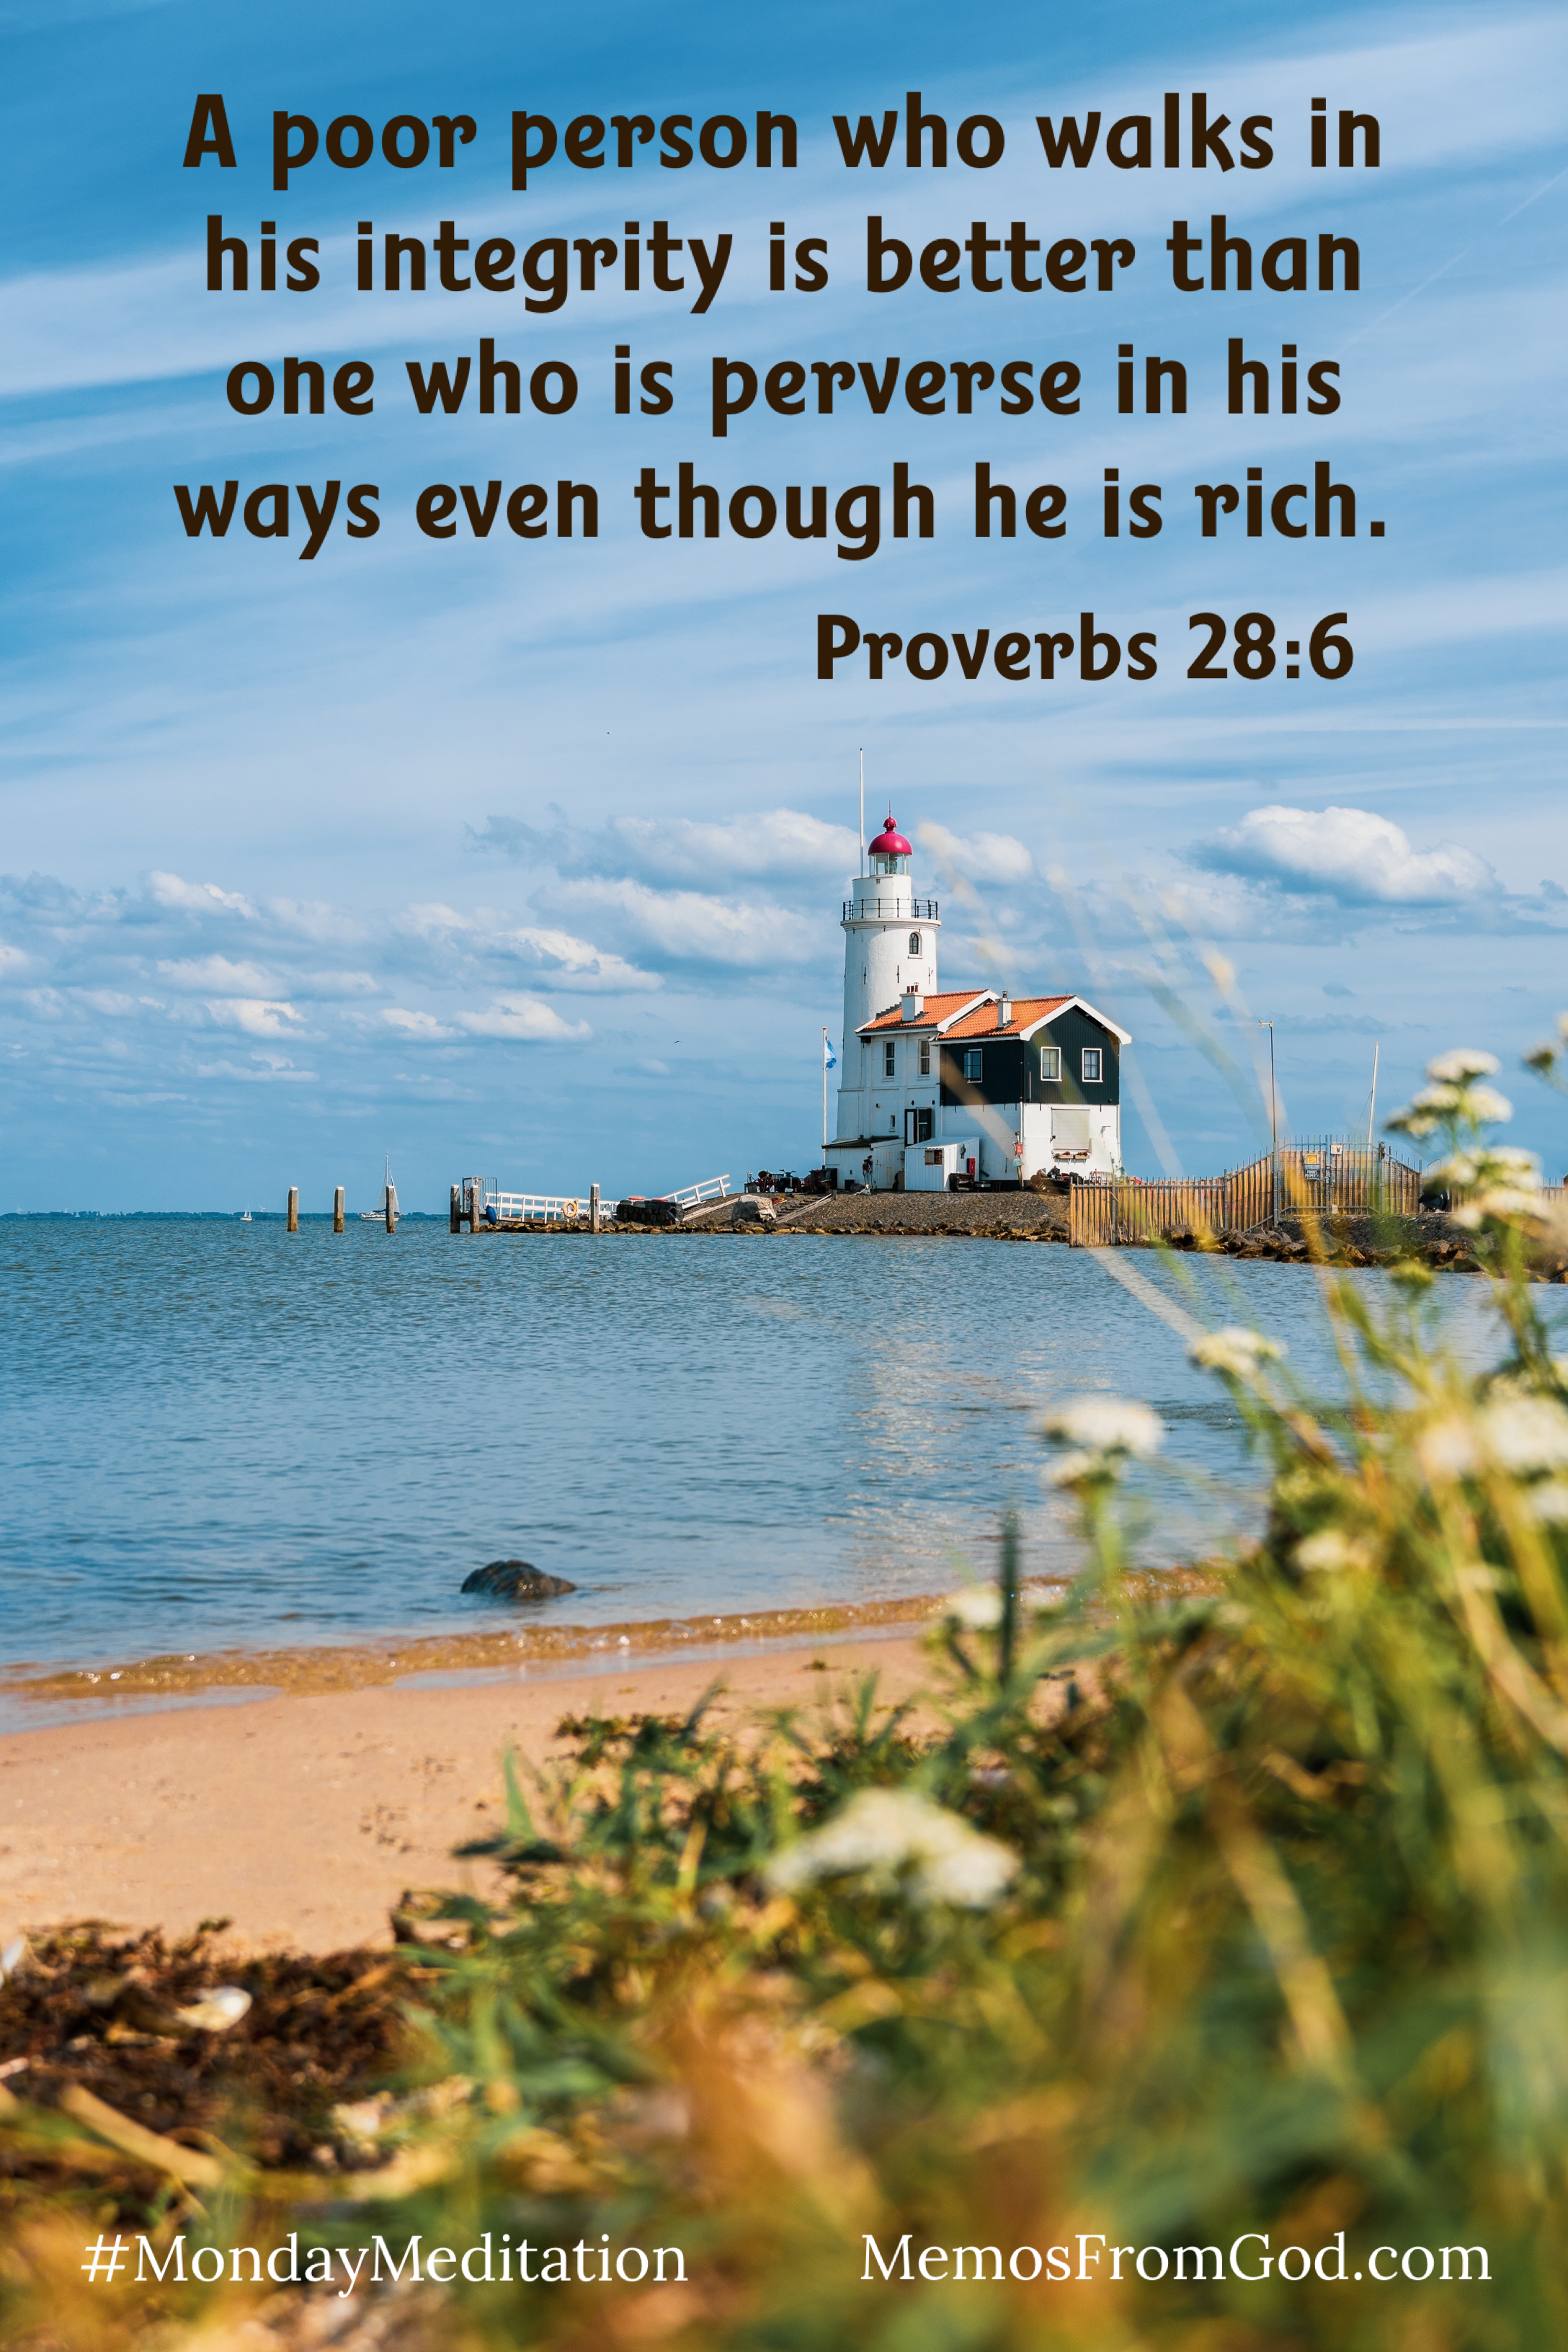 A white lighthouse with a large house attached seen from across a small bay with flowers in the foreground. Caption: A poor person who walks in his integrity is better than one who is perverse in his ways even though he is rich. Proverbs 28:6